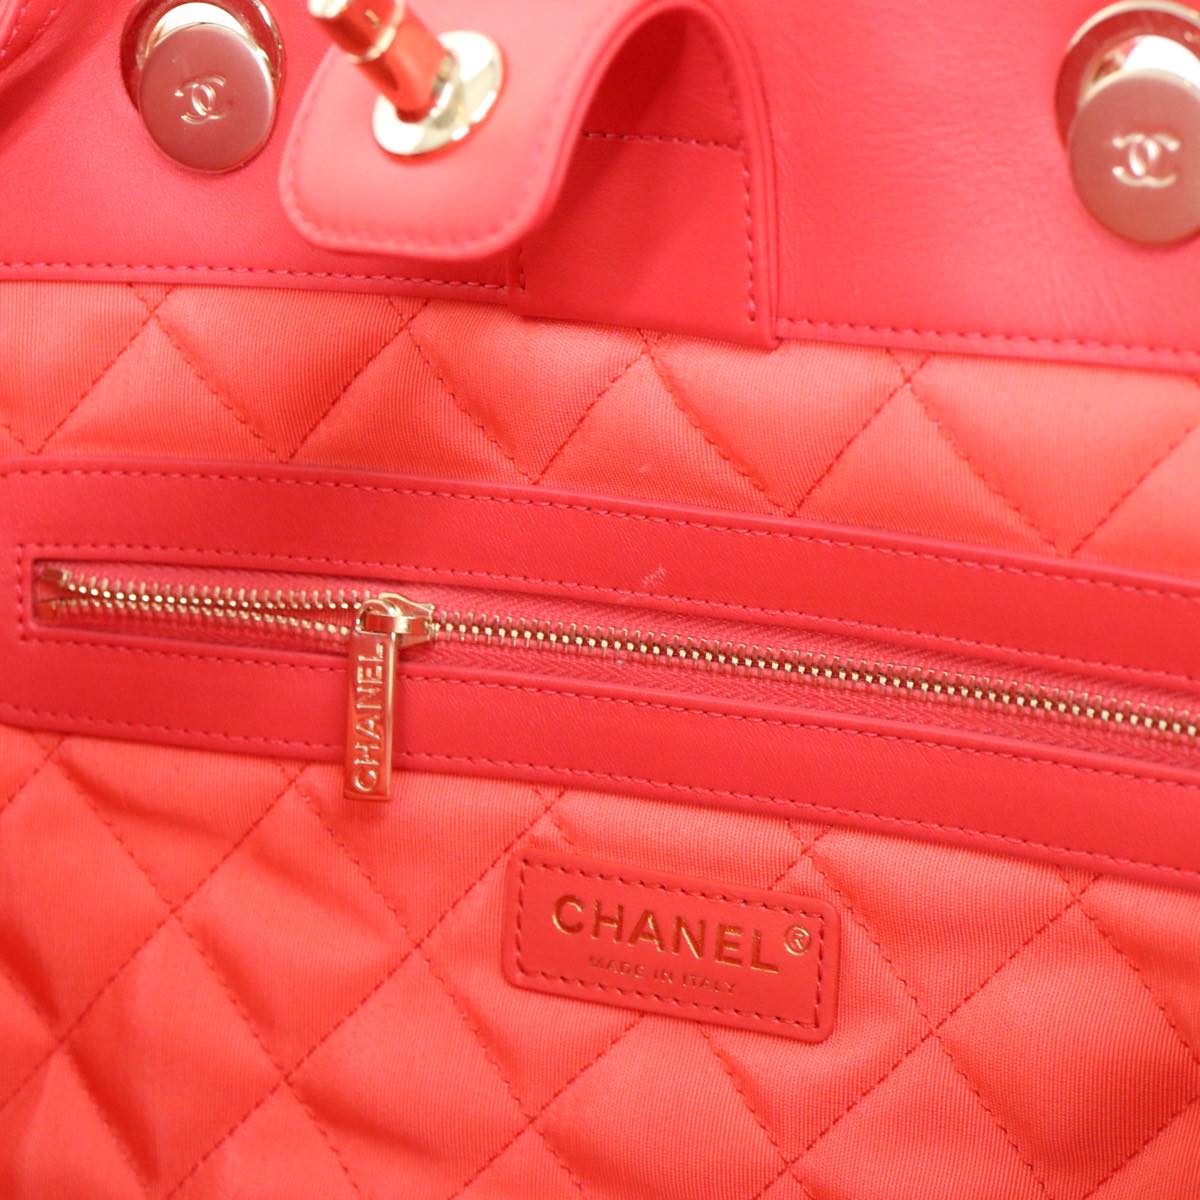 CHANEL Chain Hand Bag Pile 2way Pink CC Auth ar9158A